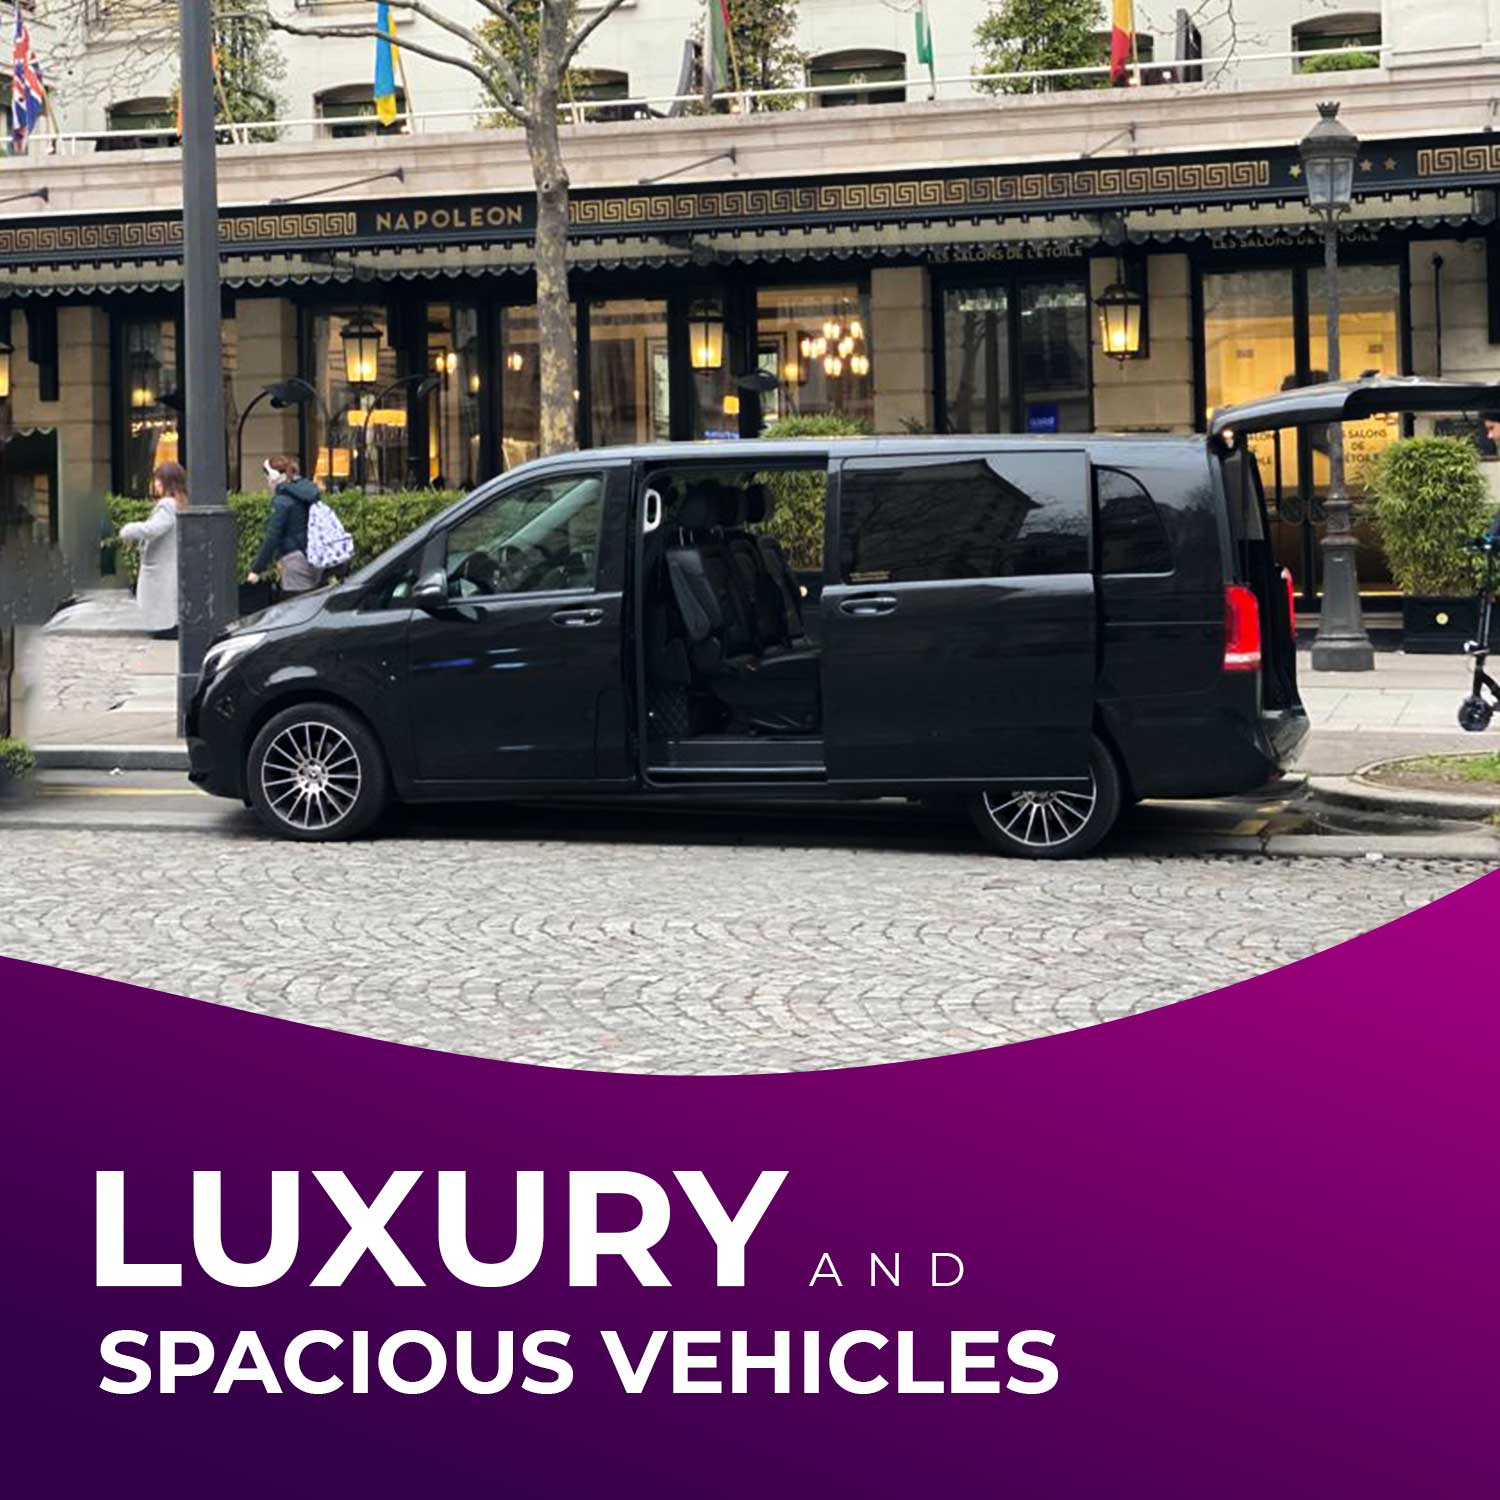 Luxury and Spacious Vehicles